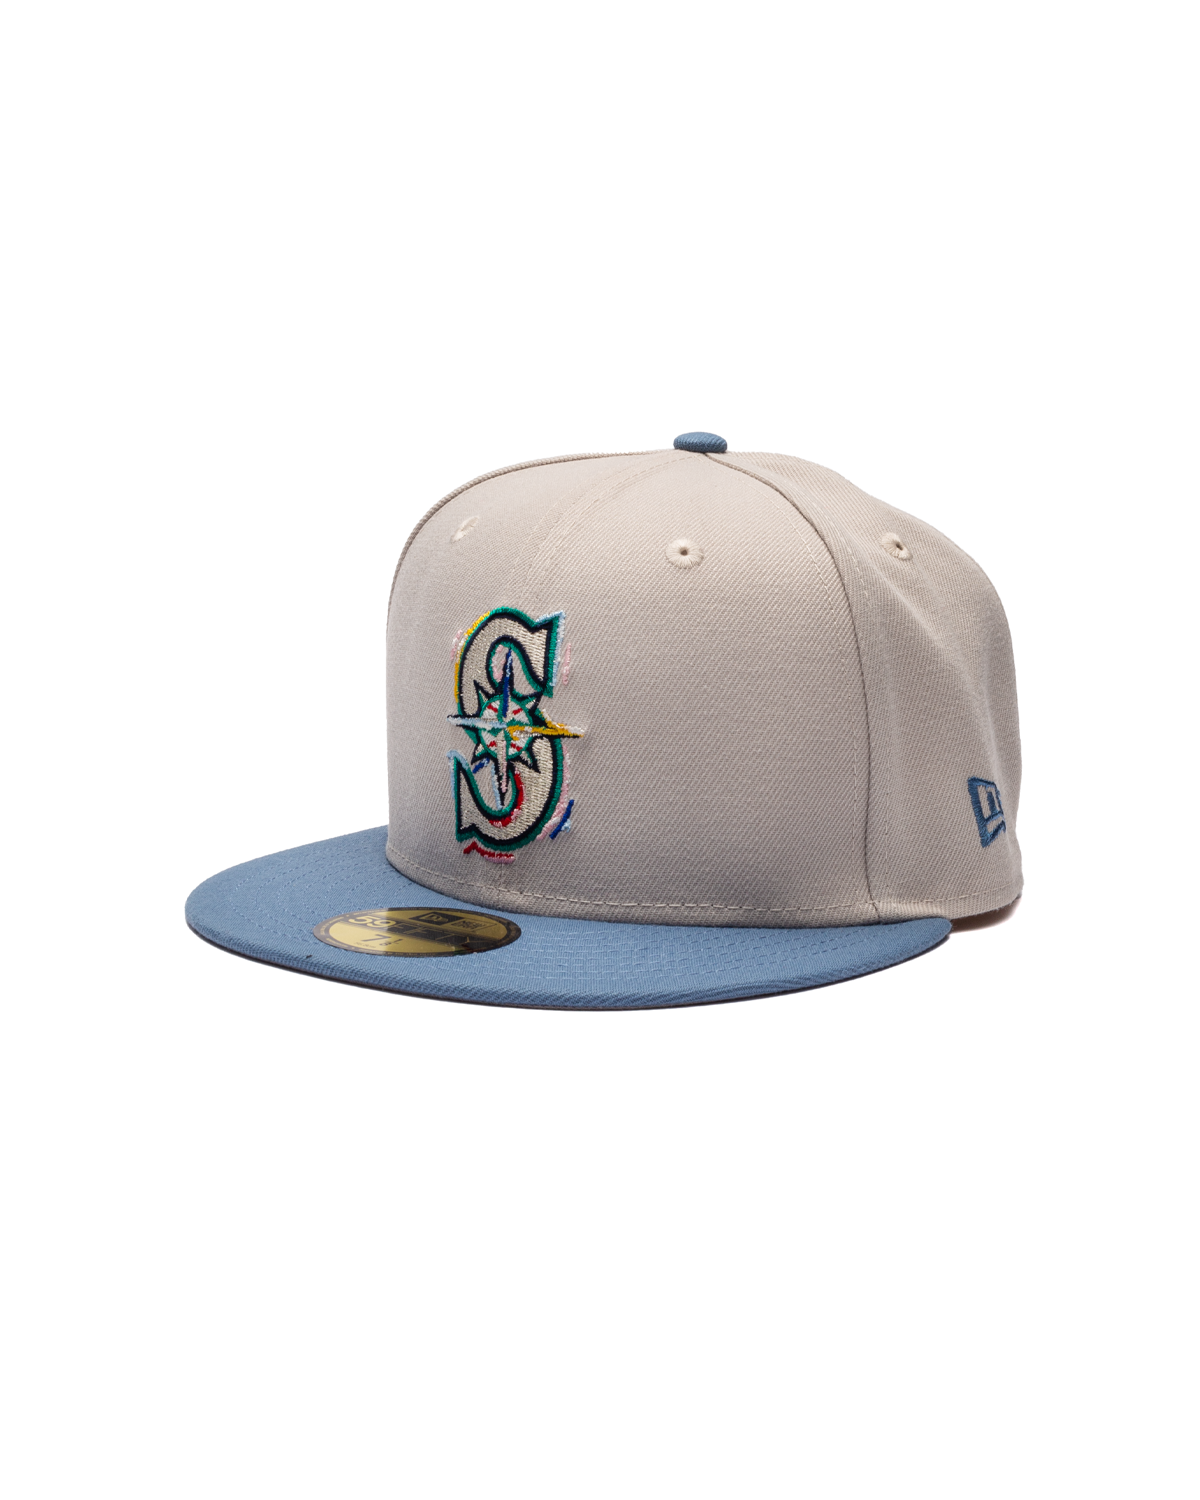 Seattle Mariners Color Brush Fitted Hat